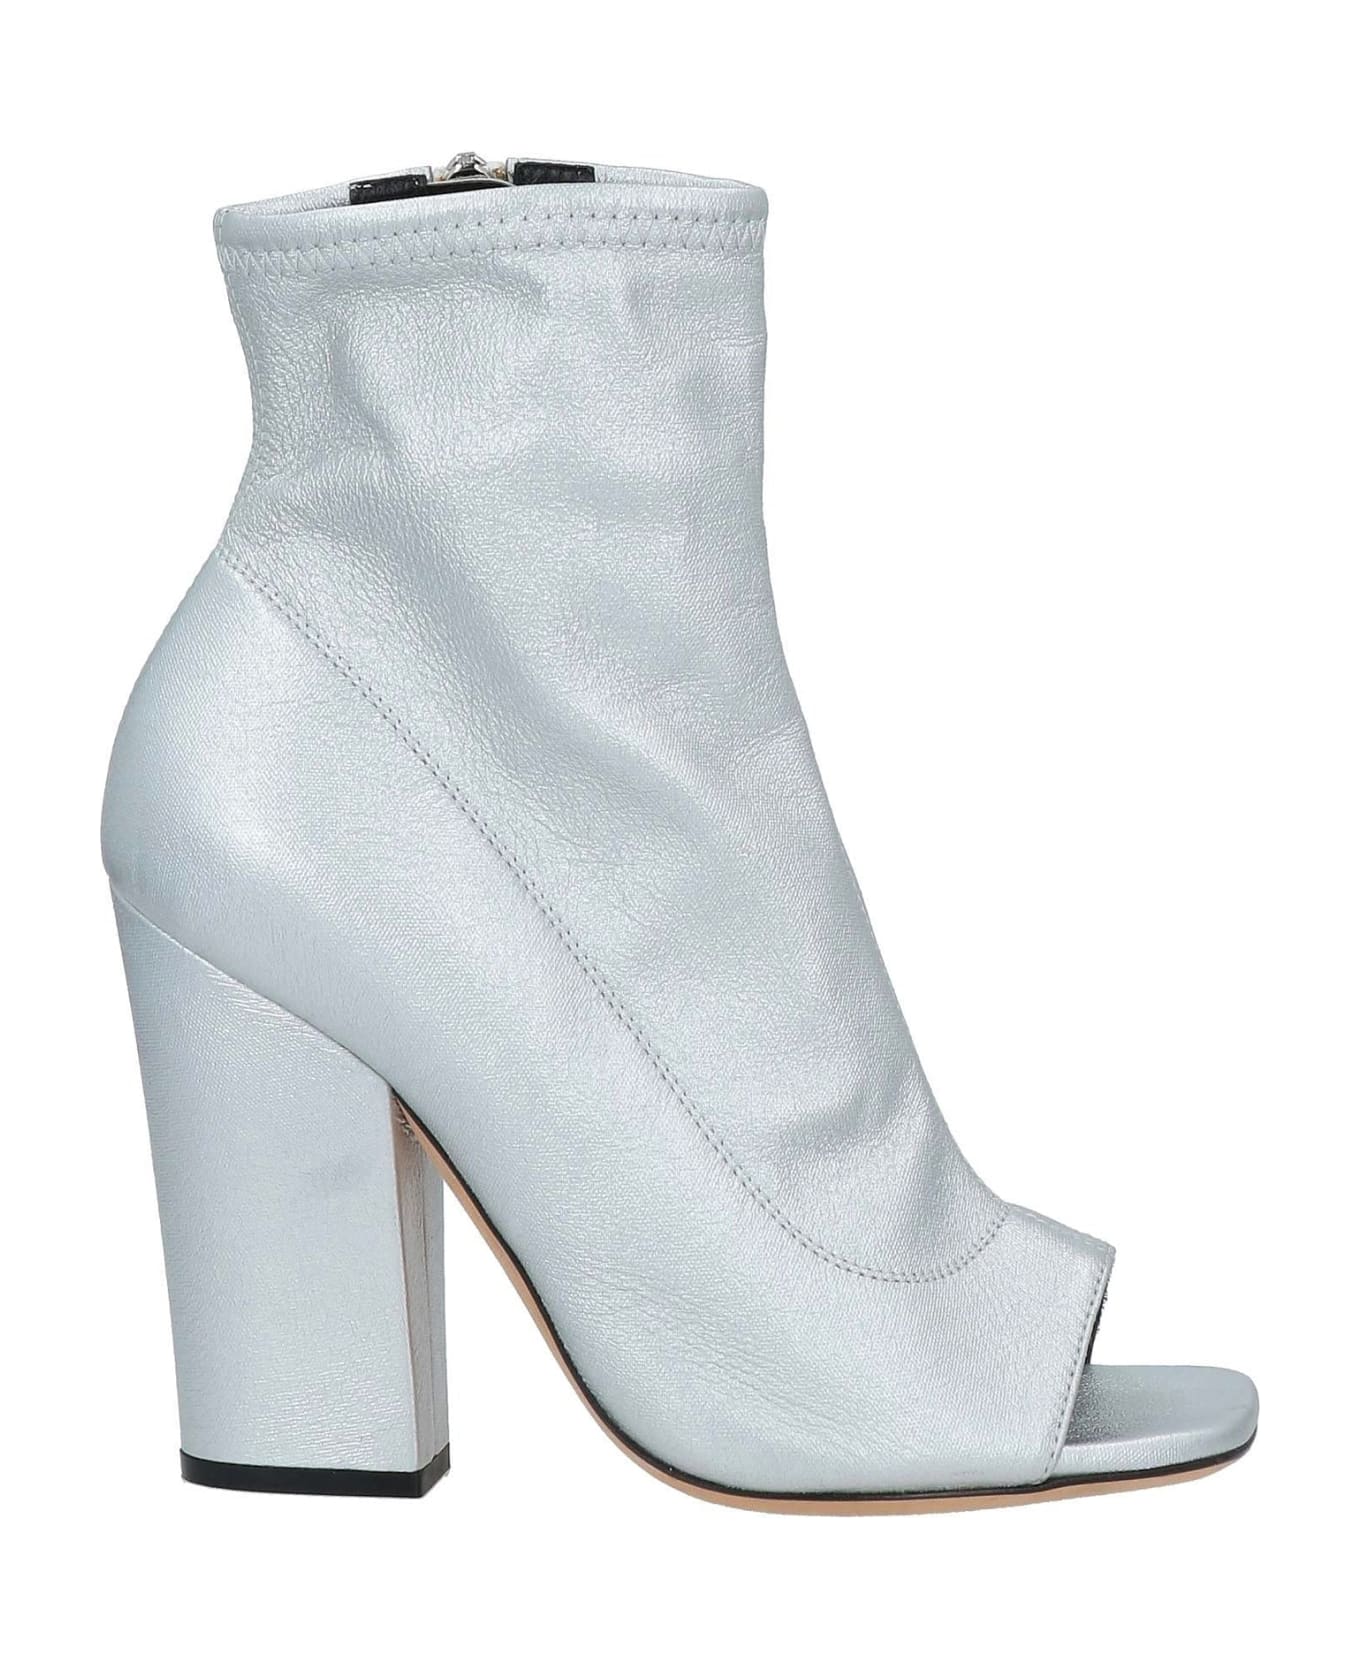 Sergio Rossi Laminated Ankle Boots - Silver